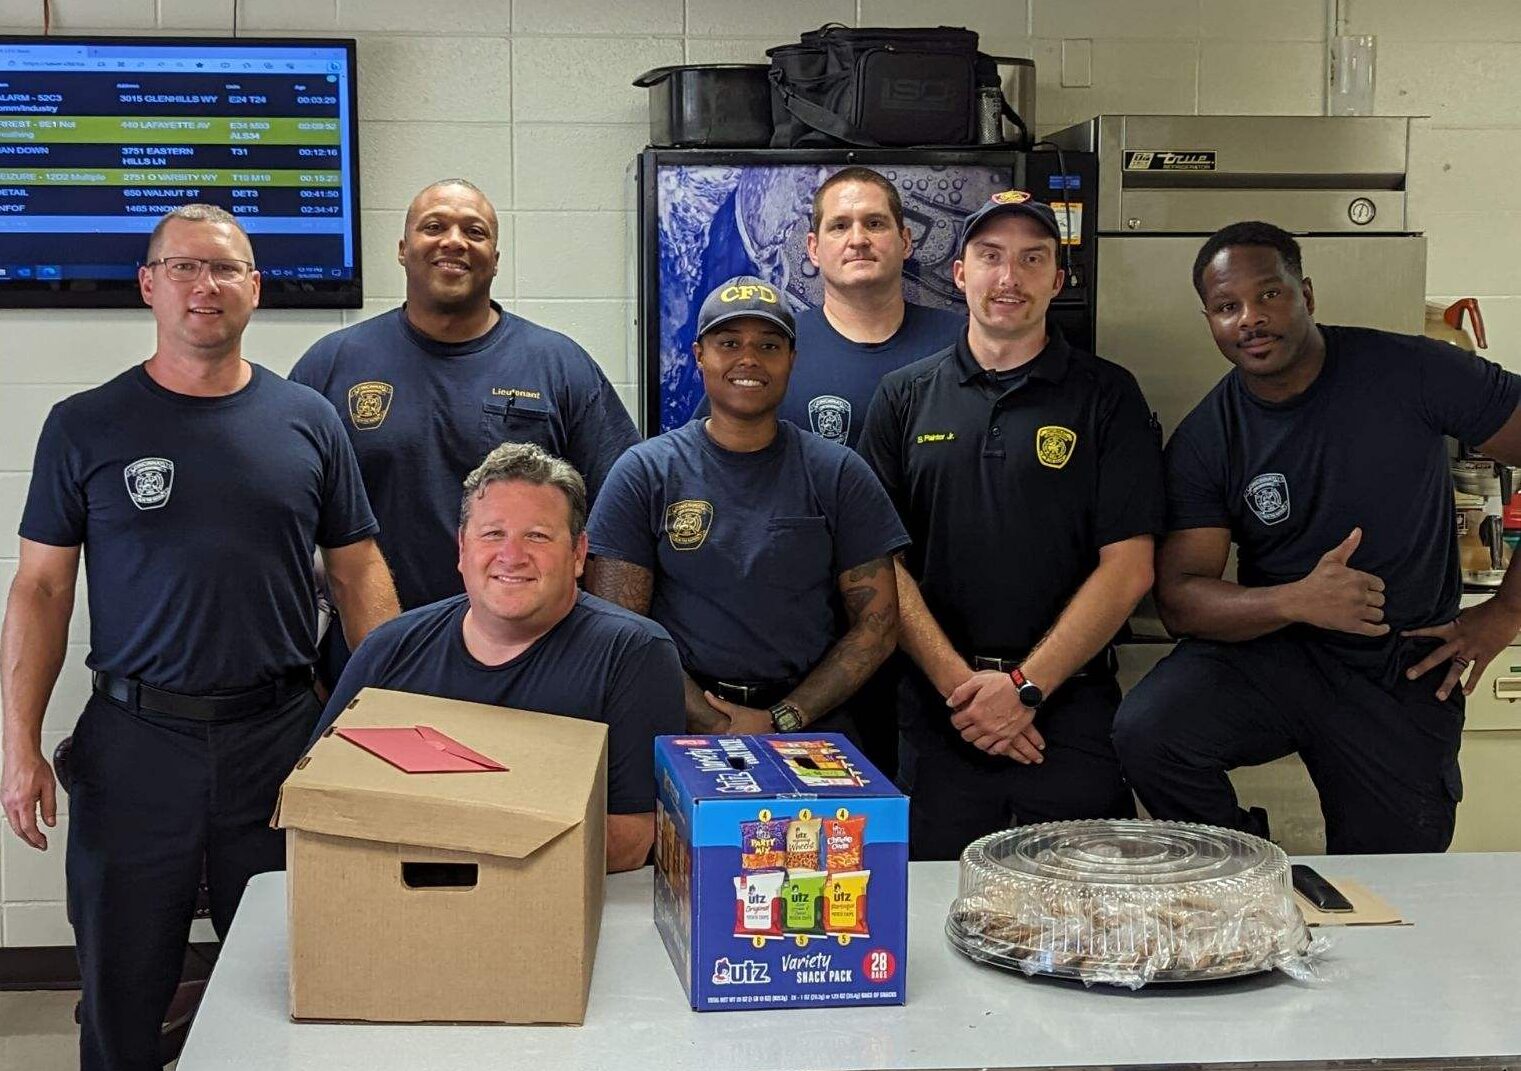 NANA / NABA delivered appreciation lunches to our neighborhood first responders